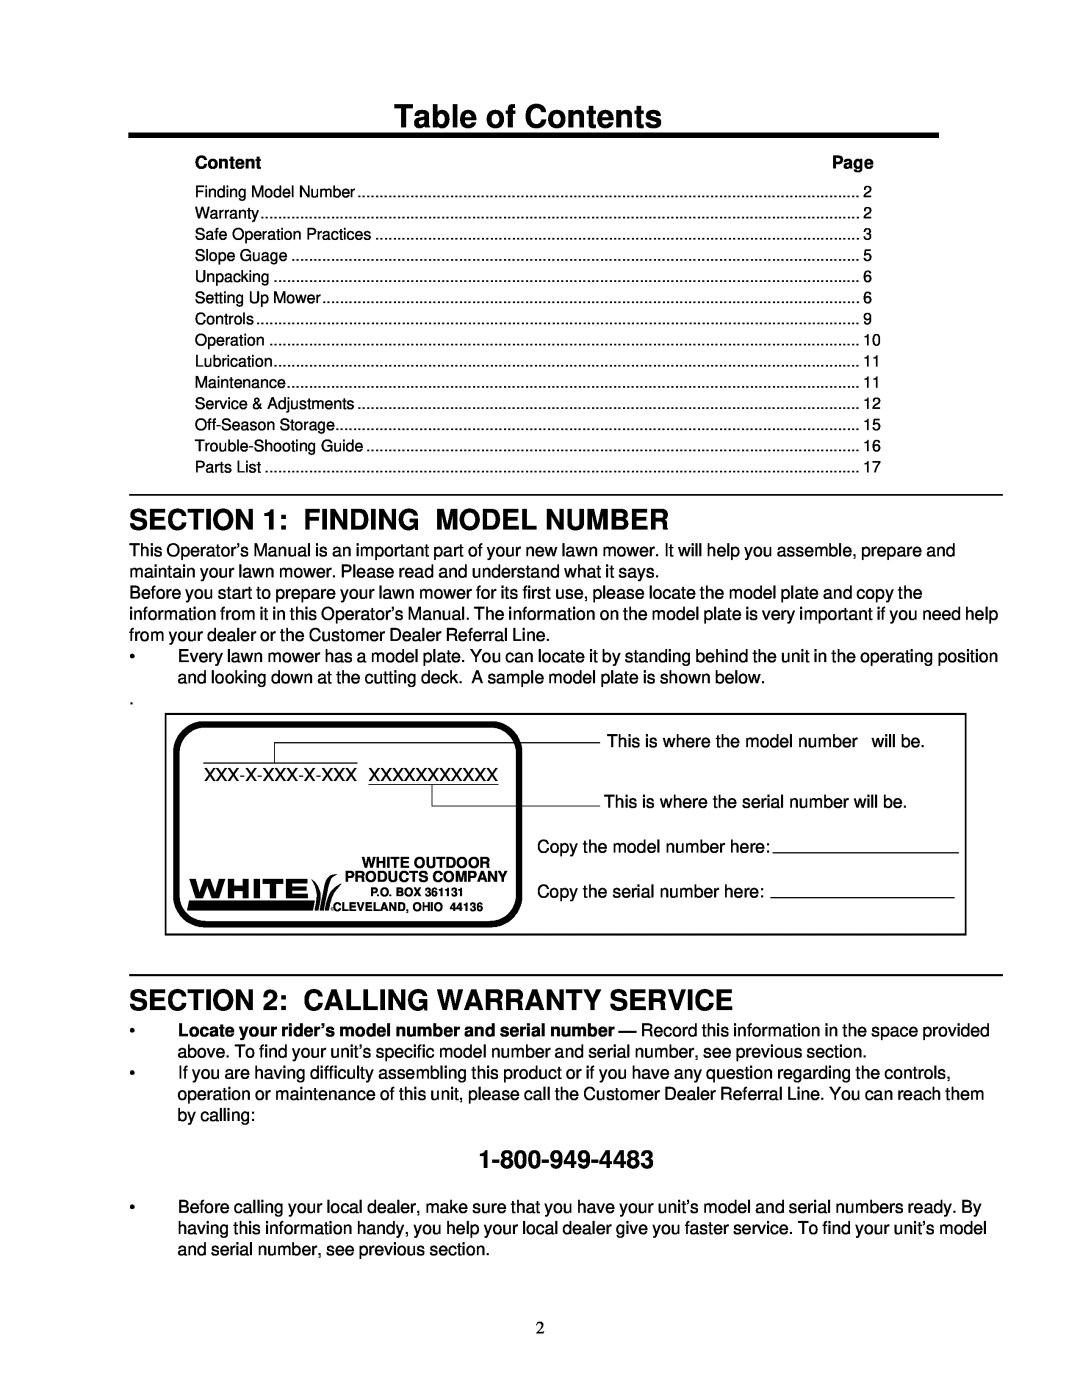 White LC-436 manual Table of Contents, Finding Model Number, Calling Warranty Service, 1-800-949-4483, Page 